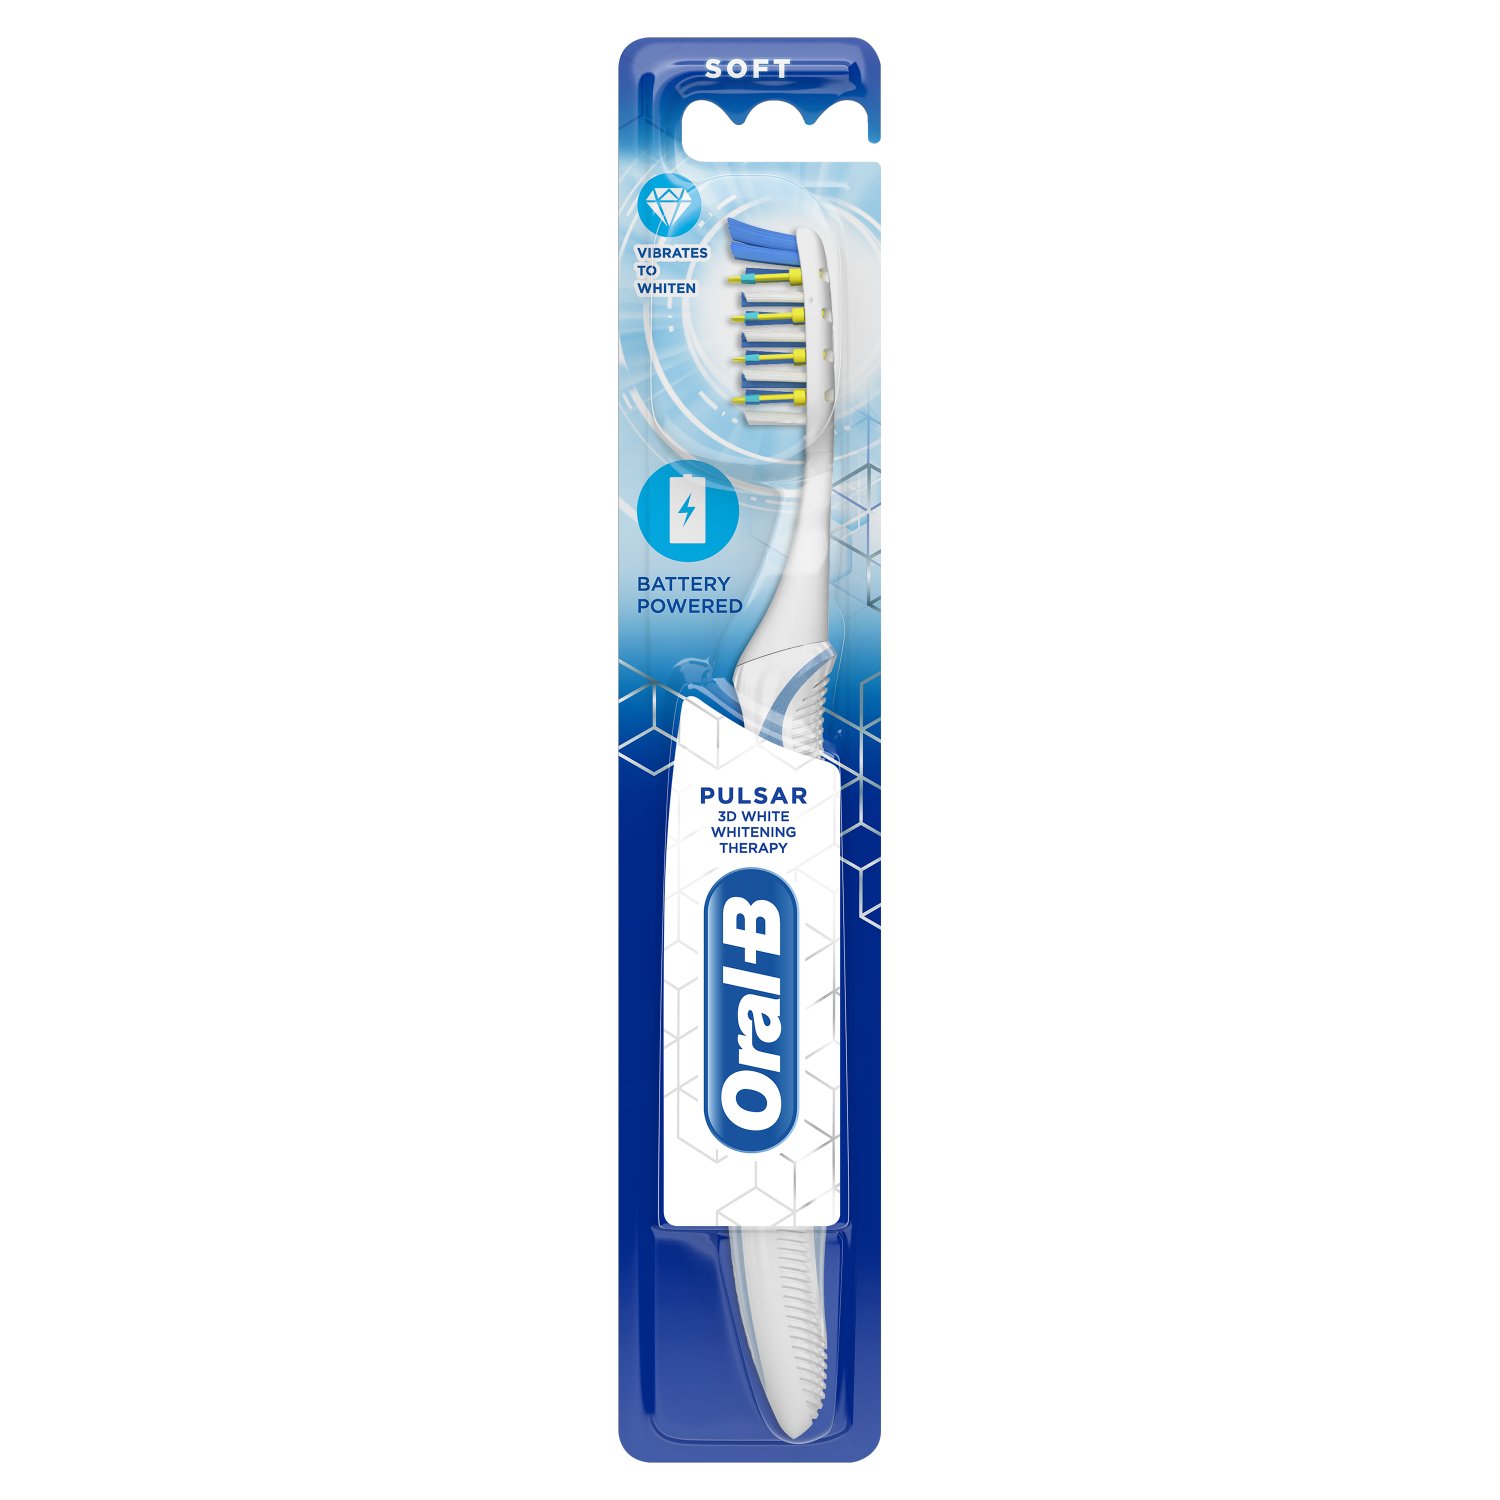 Oral-B Pulsar 3D White Whitening Therapy battery toothbrush gives you the control of a regular manual brush and soflty brightens your teeth. The brush softly whitens teeth in 1 week by removing surface stains. It removes stains on teeth, between teeth and along the gumline.